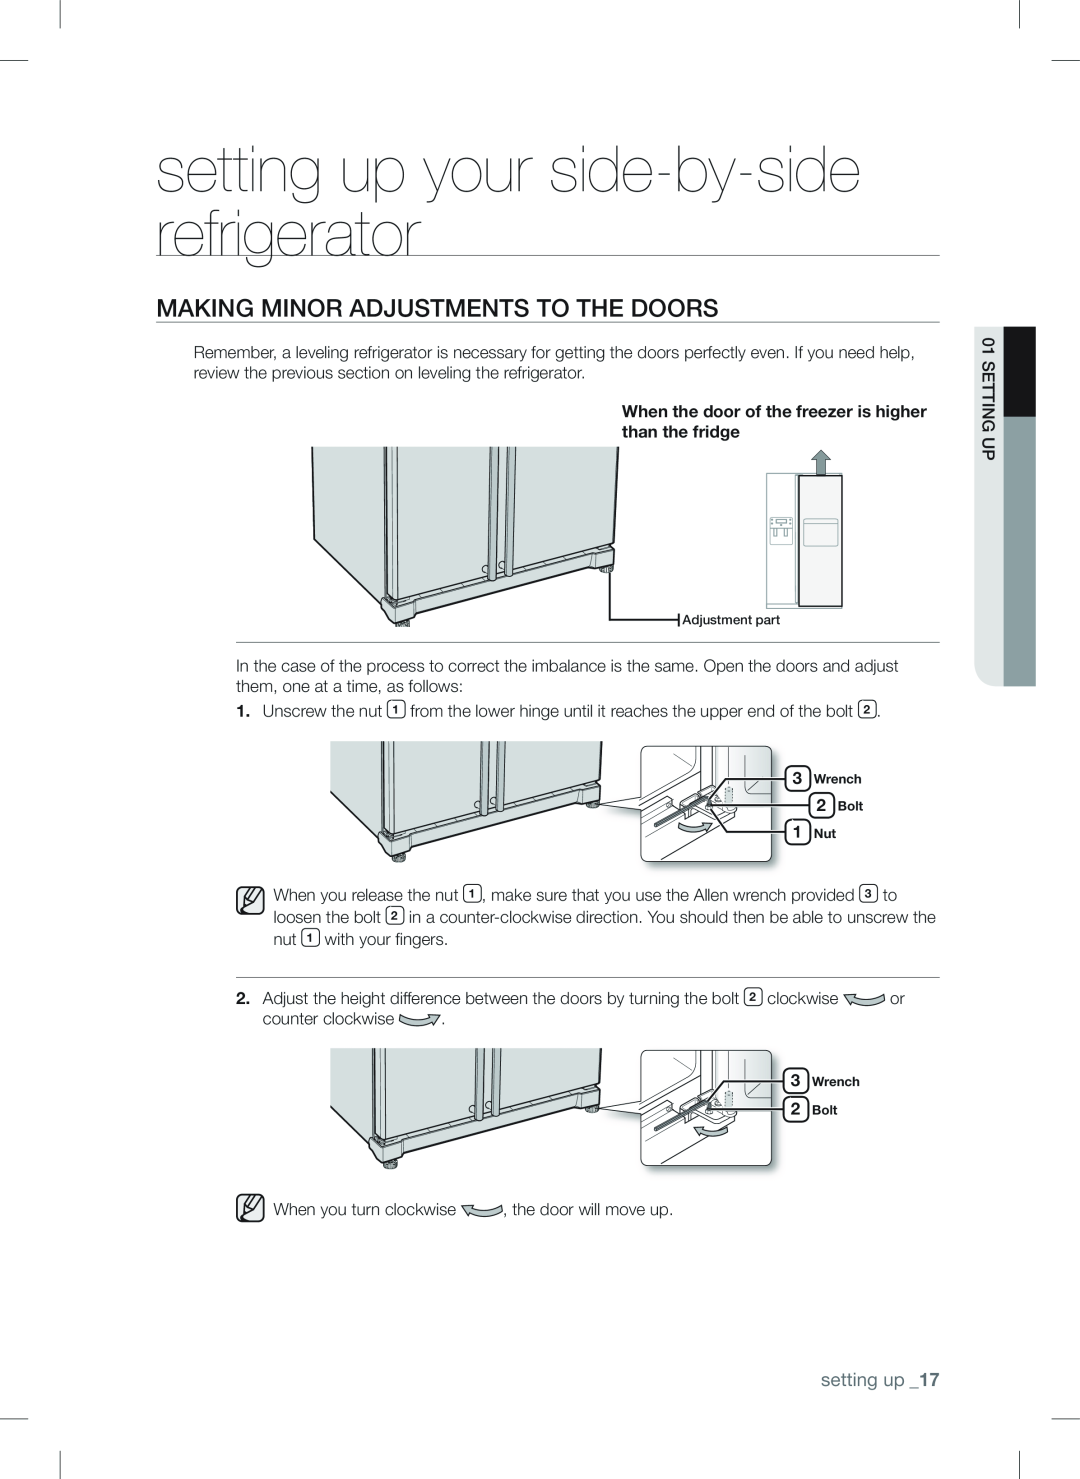 Samsung RSA1N***, RSA1Z***, RSA1U*** Making mInor adjustments to the doors, setting up your side-by-side refrigerator 